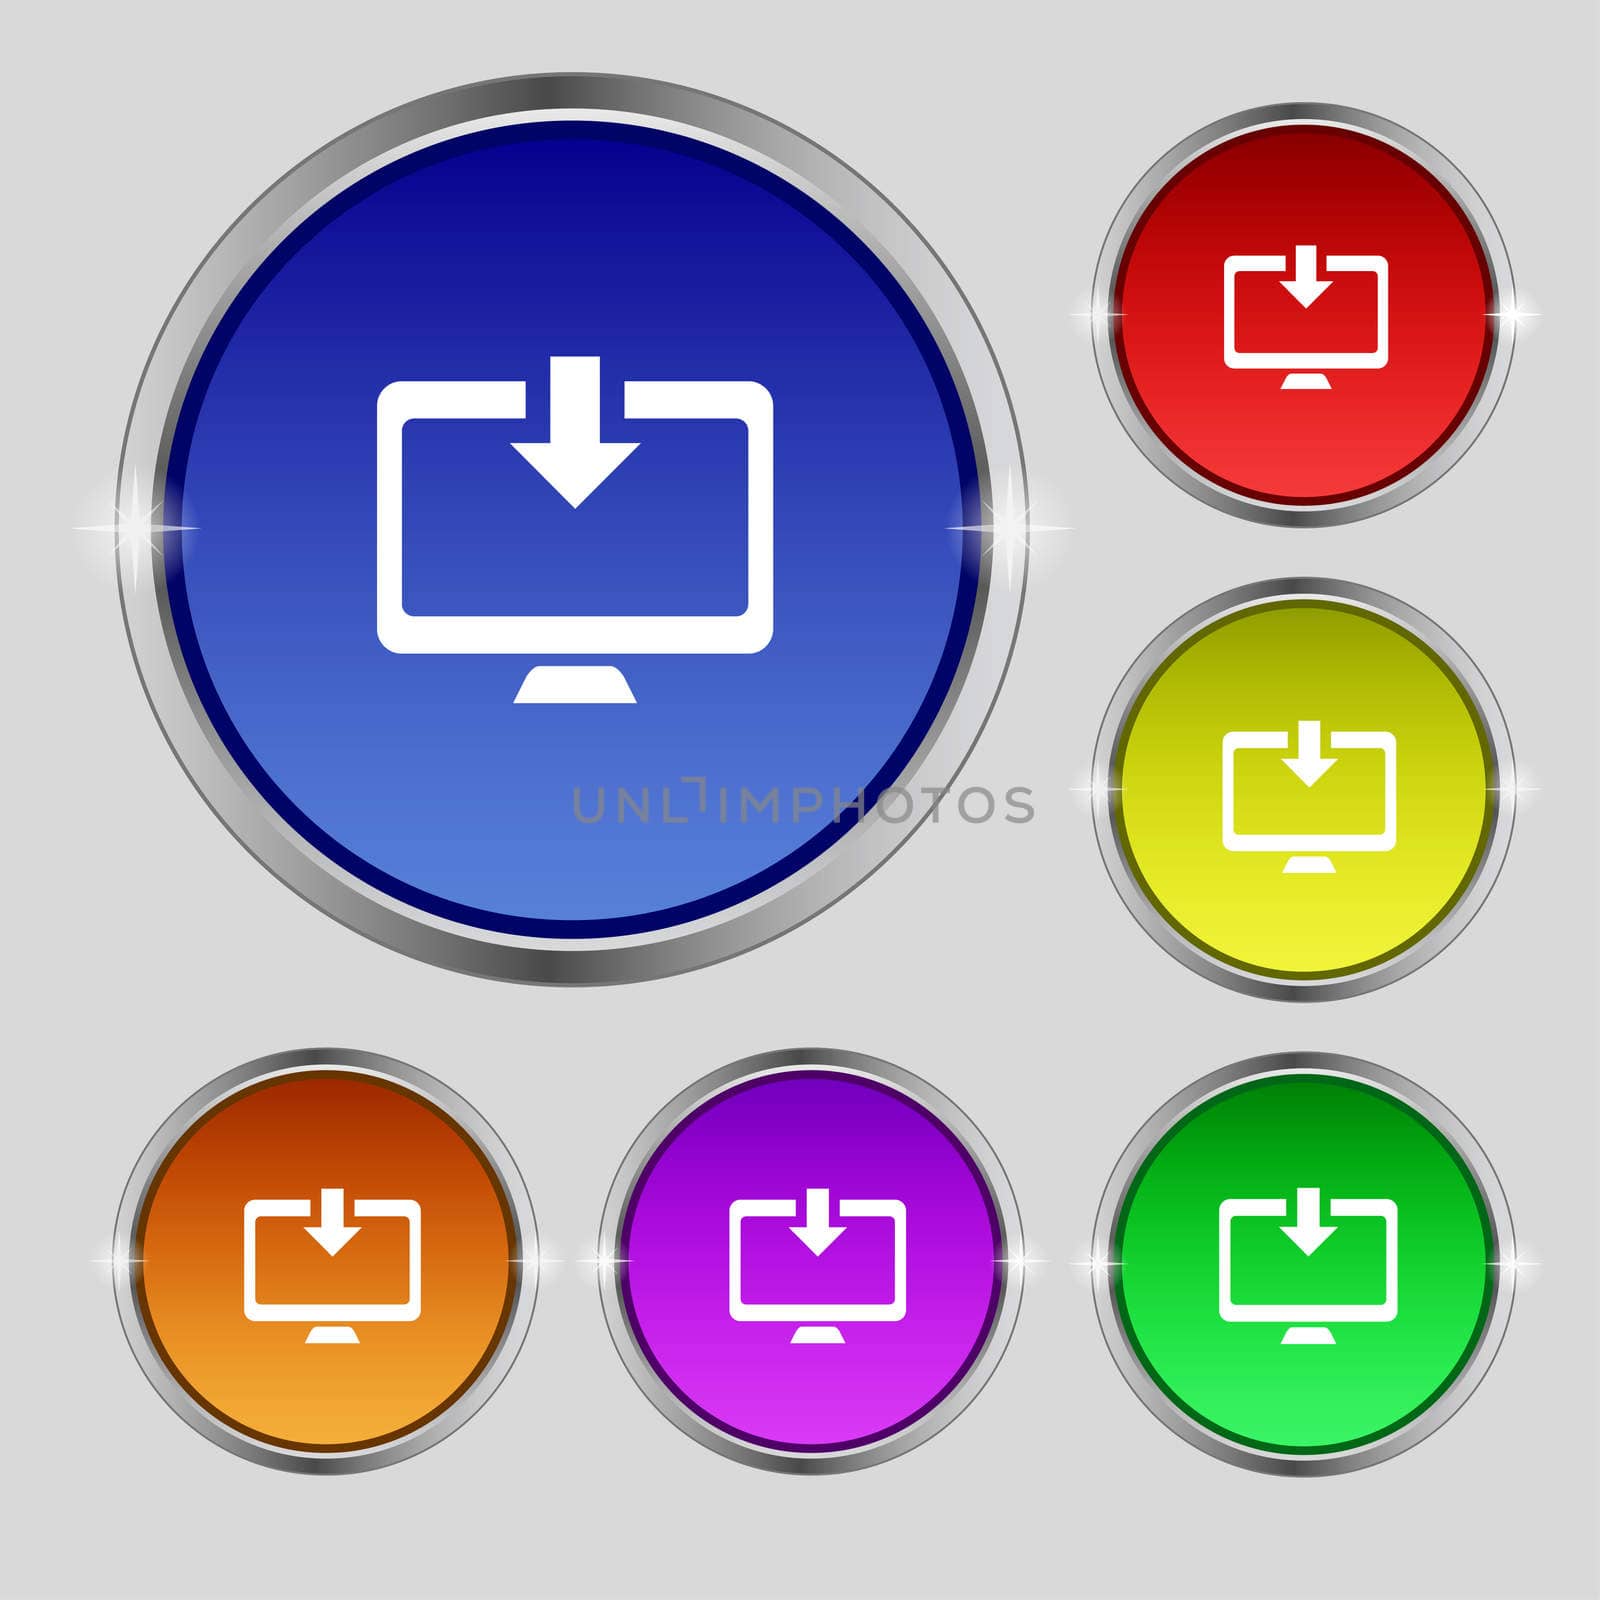 Download, Load, Backup icon sign. Round symbol on bright colourful buttons.  by serhii_lohvyniuk